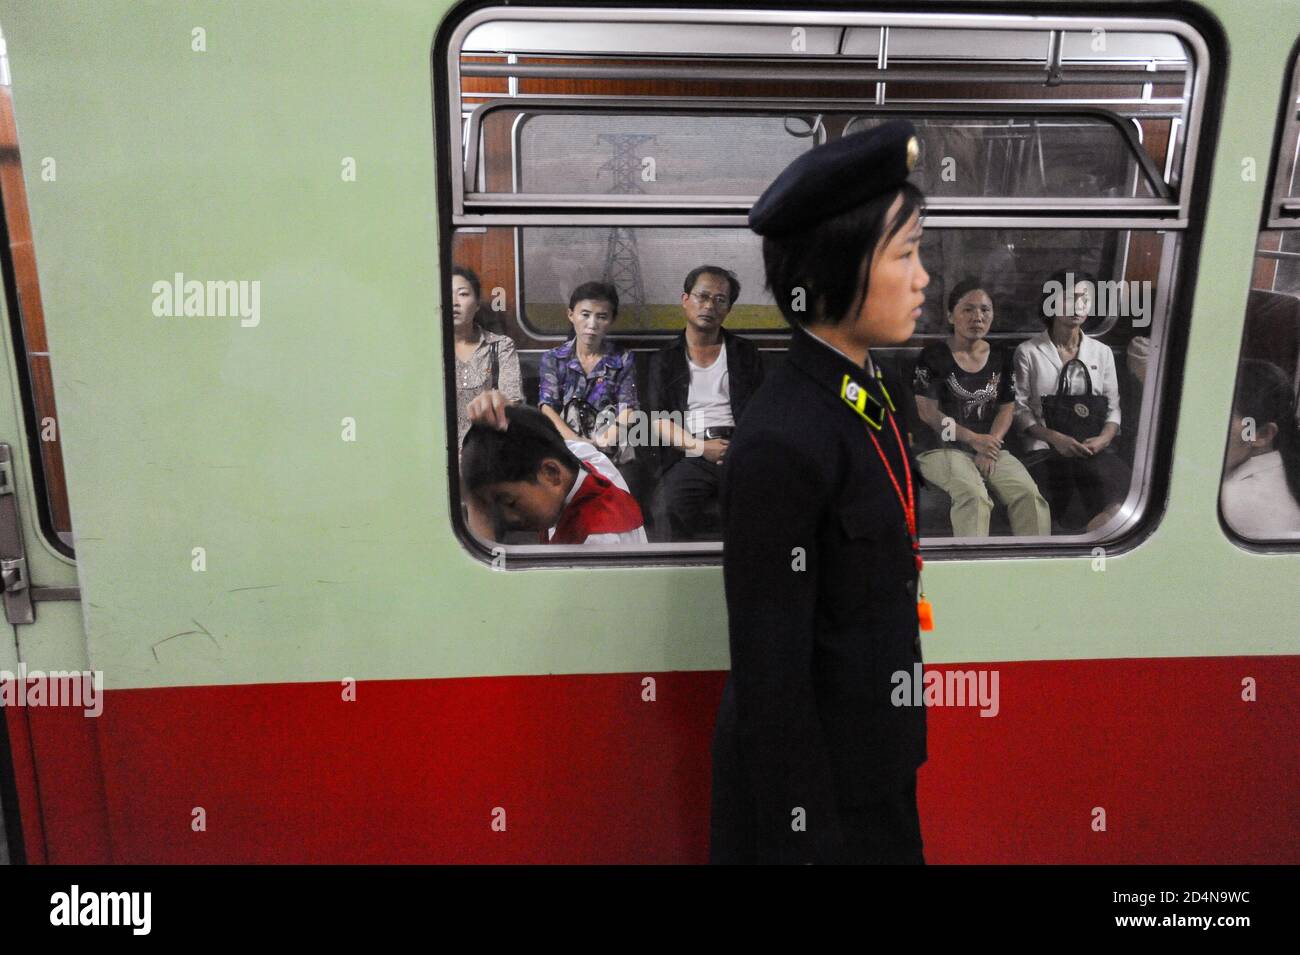 09.08.2012, Pyongyang, North Korea, Asia - A platform attendant stands in front of a subway train of the Pyongyang Metro with waiting commuters inside. Stock Photo